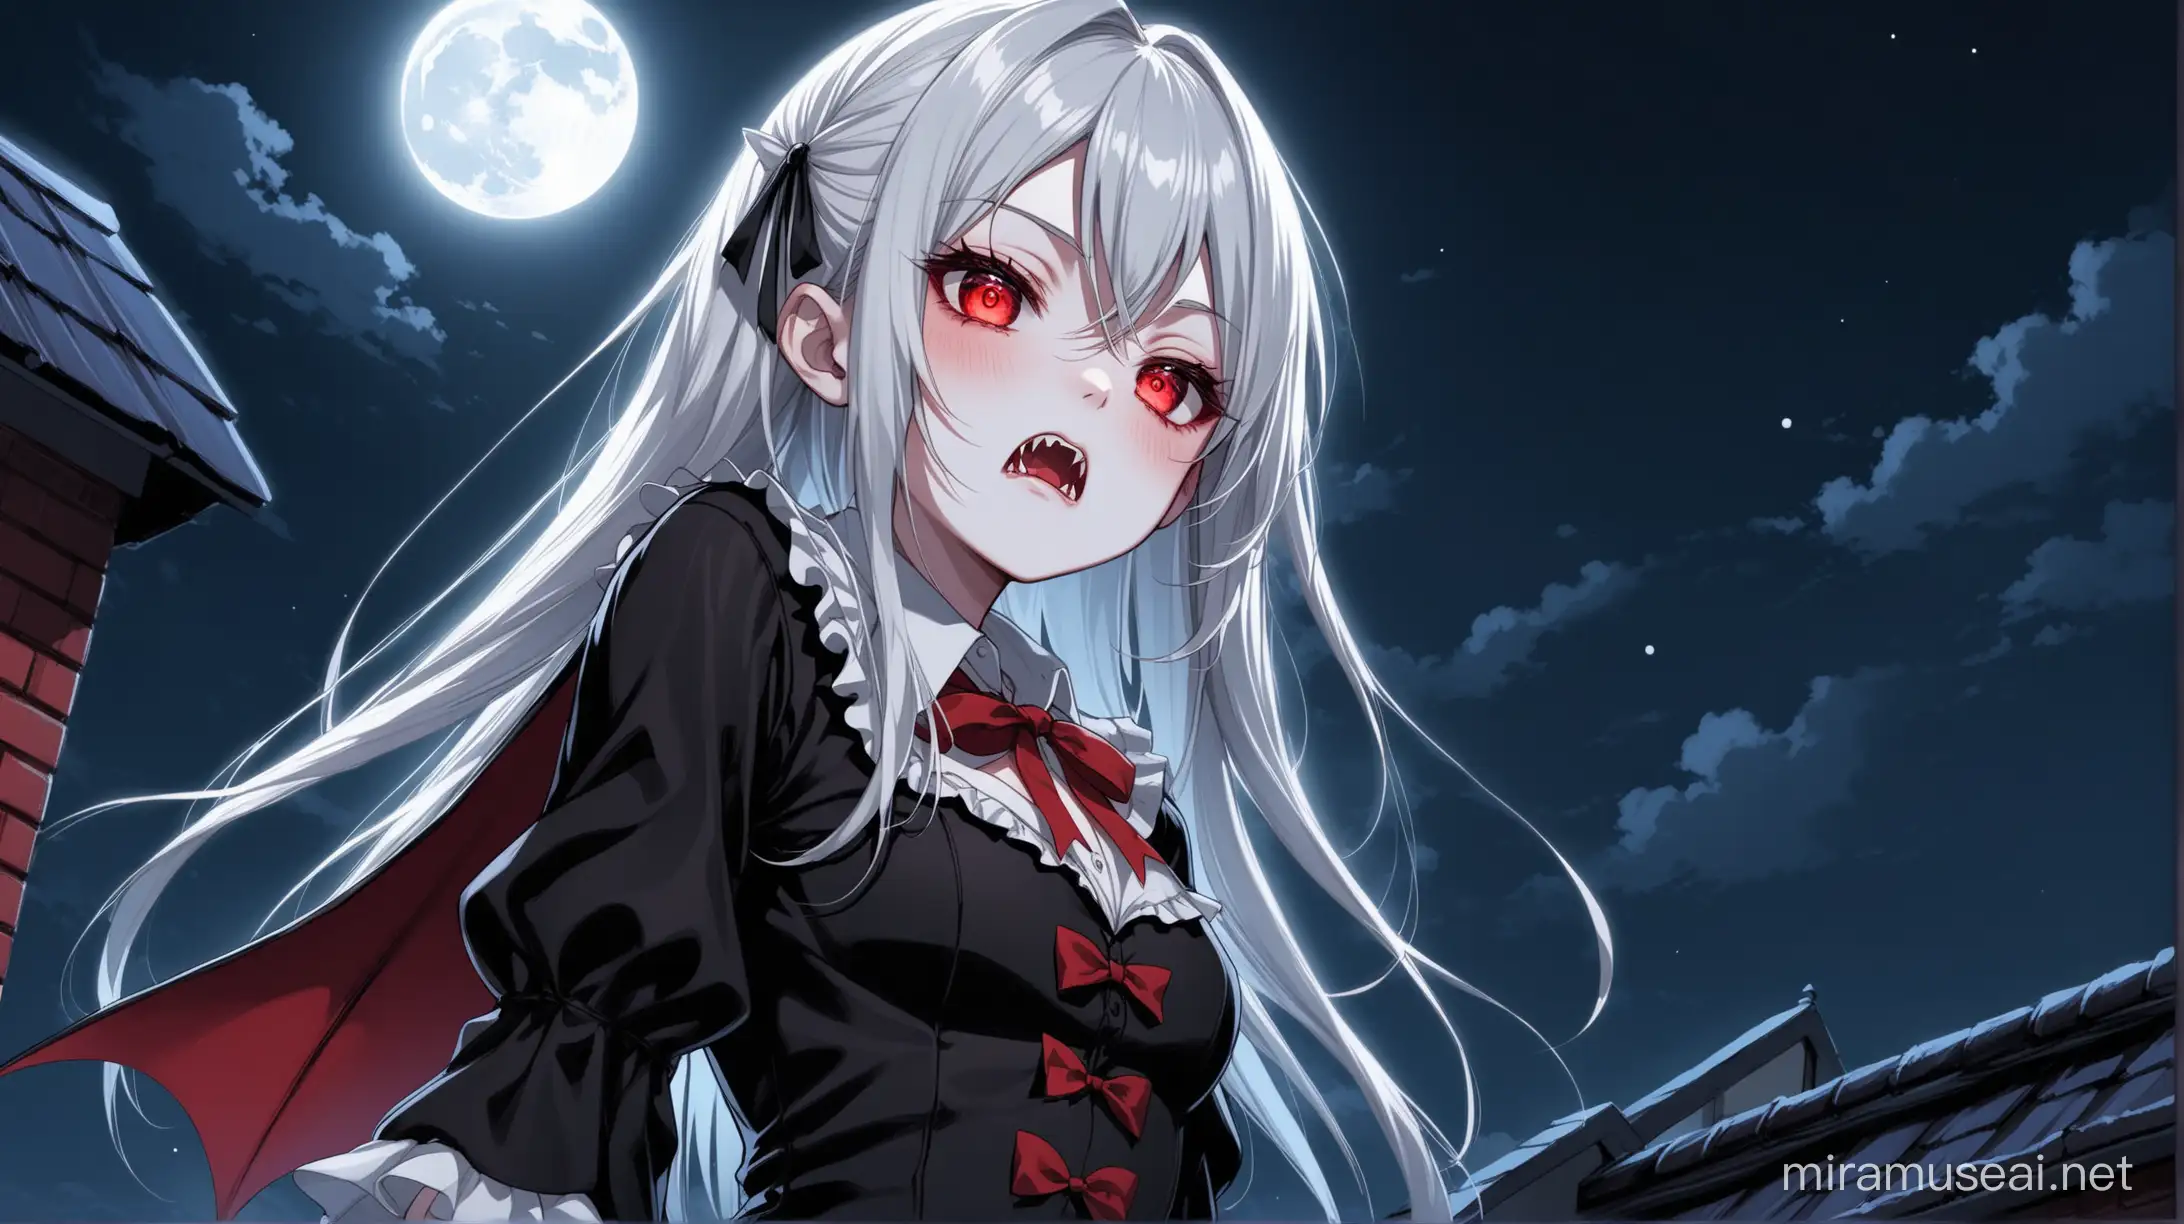 Young Vampire Girl Krul Tepes on Rooftop Under Full Moon